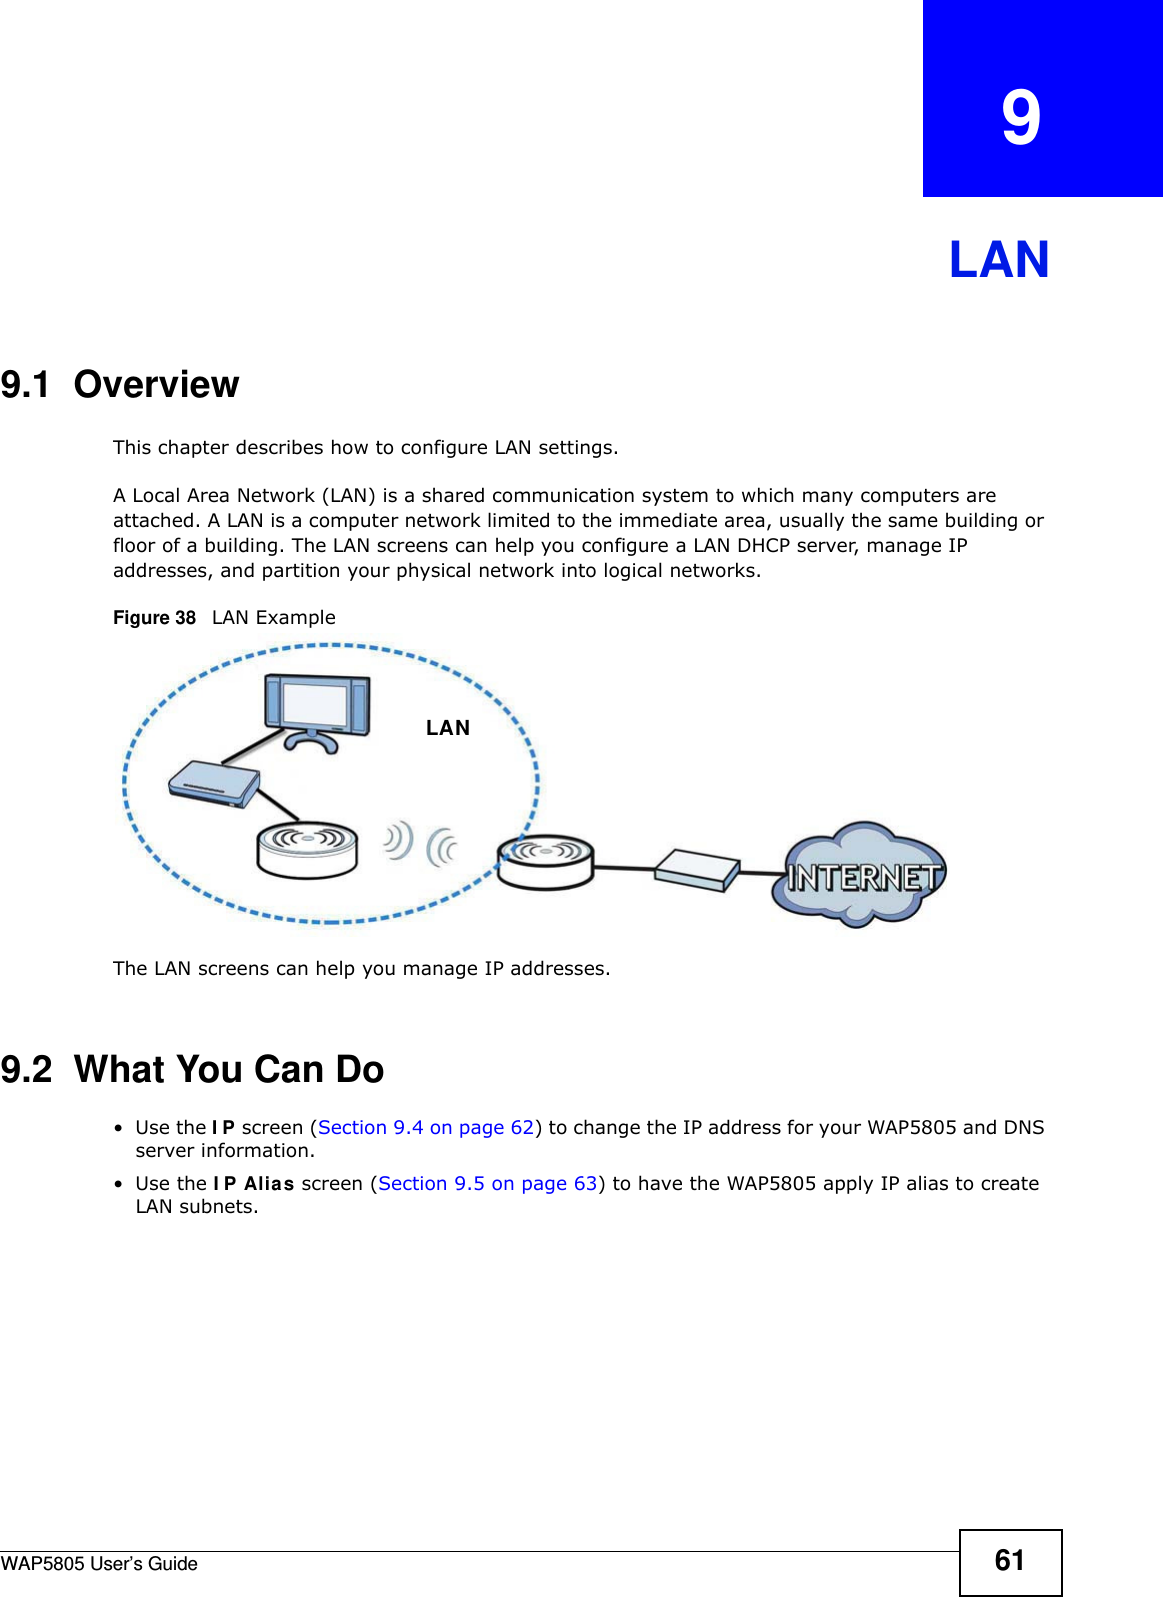 WAP5805 User’s Guide 61CHAPTER   9LAN9.1  OverviewThis chapter describes how to configure LAN settings.A Local Area Network (LAN) is a shared communication system to which many computers are attached. A LAN is a computer network limited to the immediate area, usually the same building or floor of a building. The LAN screens can help you configure a LAN DHCP server, manage IP addresses, and partition your physical network into logical networks.Figure 38   LAN ExampleThe LAN screens can help you manage IP addresses.9.2  What You Can Do•Use the IP screen (Section 9.4 on page 62) to change the IP address for your WAP5805 and DNS server information.•Use the IP Alias screen (Section 9.5 on page 63) to have the WAP5805 apply IP alias to create LAN subnets.LAN